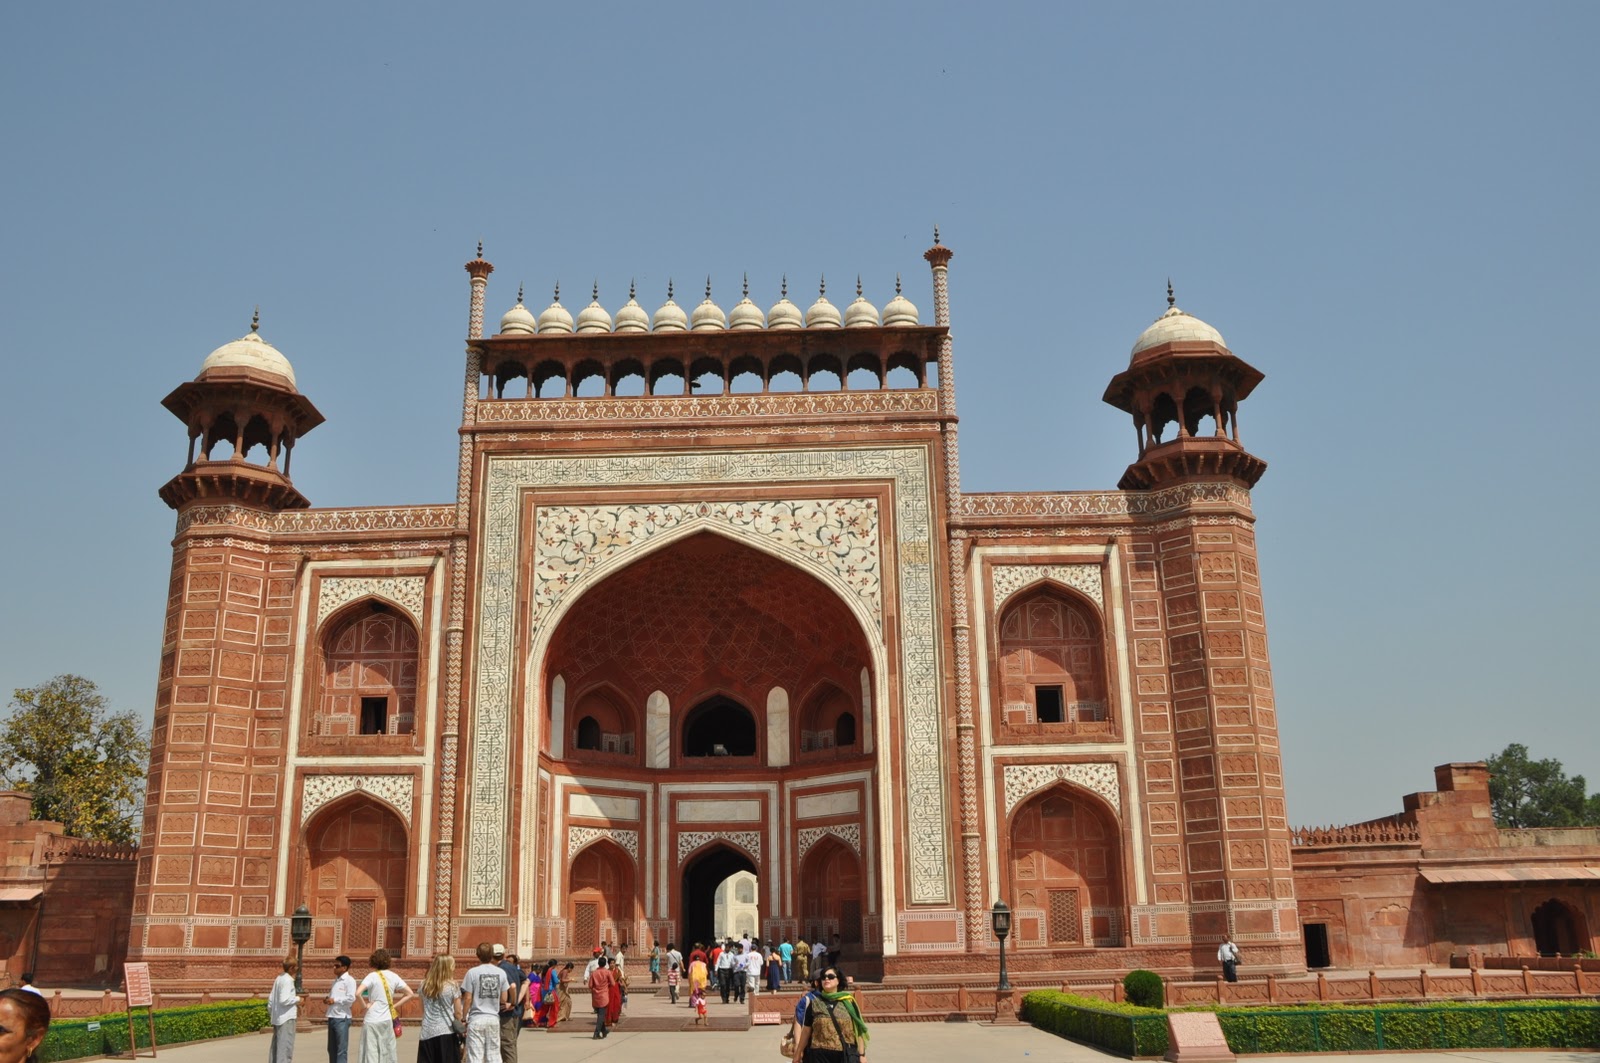 On the road to somewhere: The Taj Mahal and Agra Fort...m